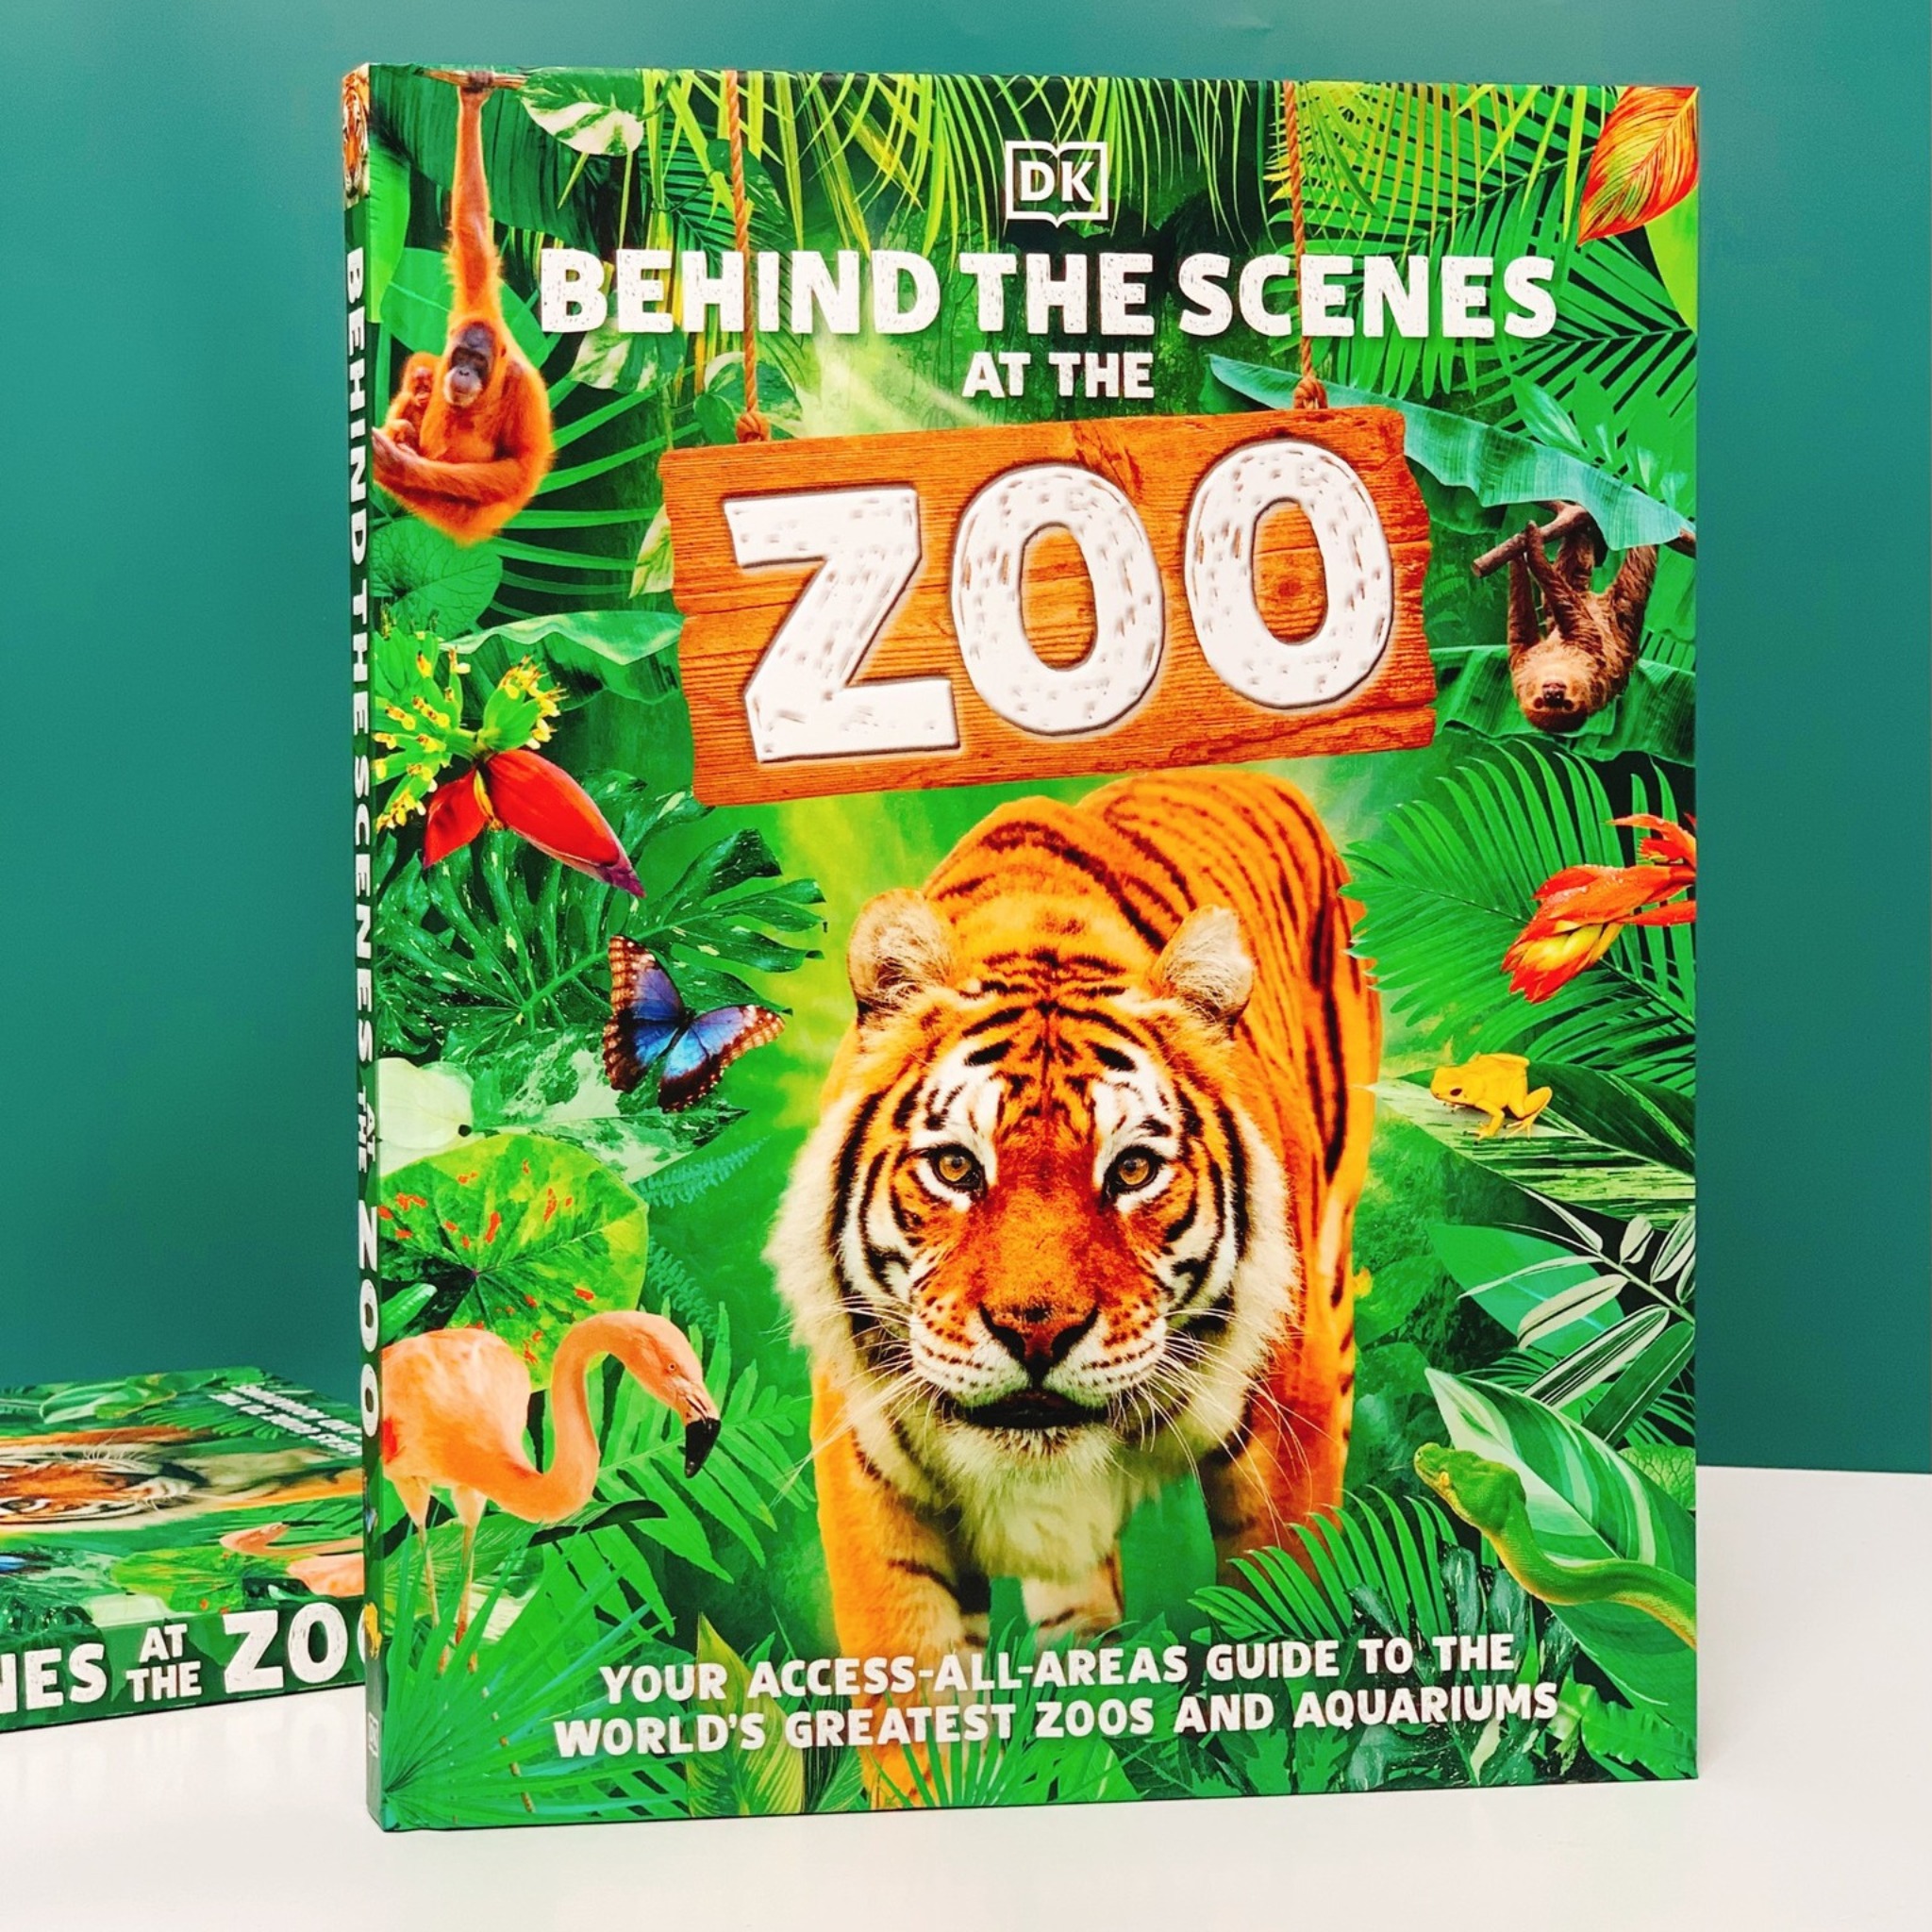 Behind the Scenes at the Zoo : Your Access-All-Areas Guide to the World's Greatest Zoos and Aquariums